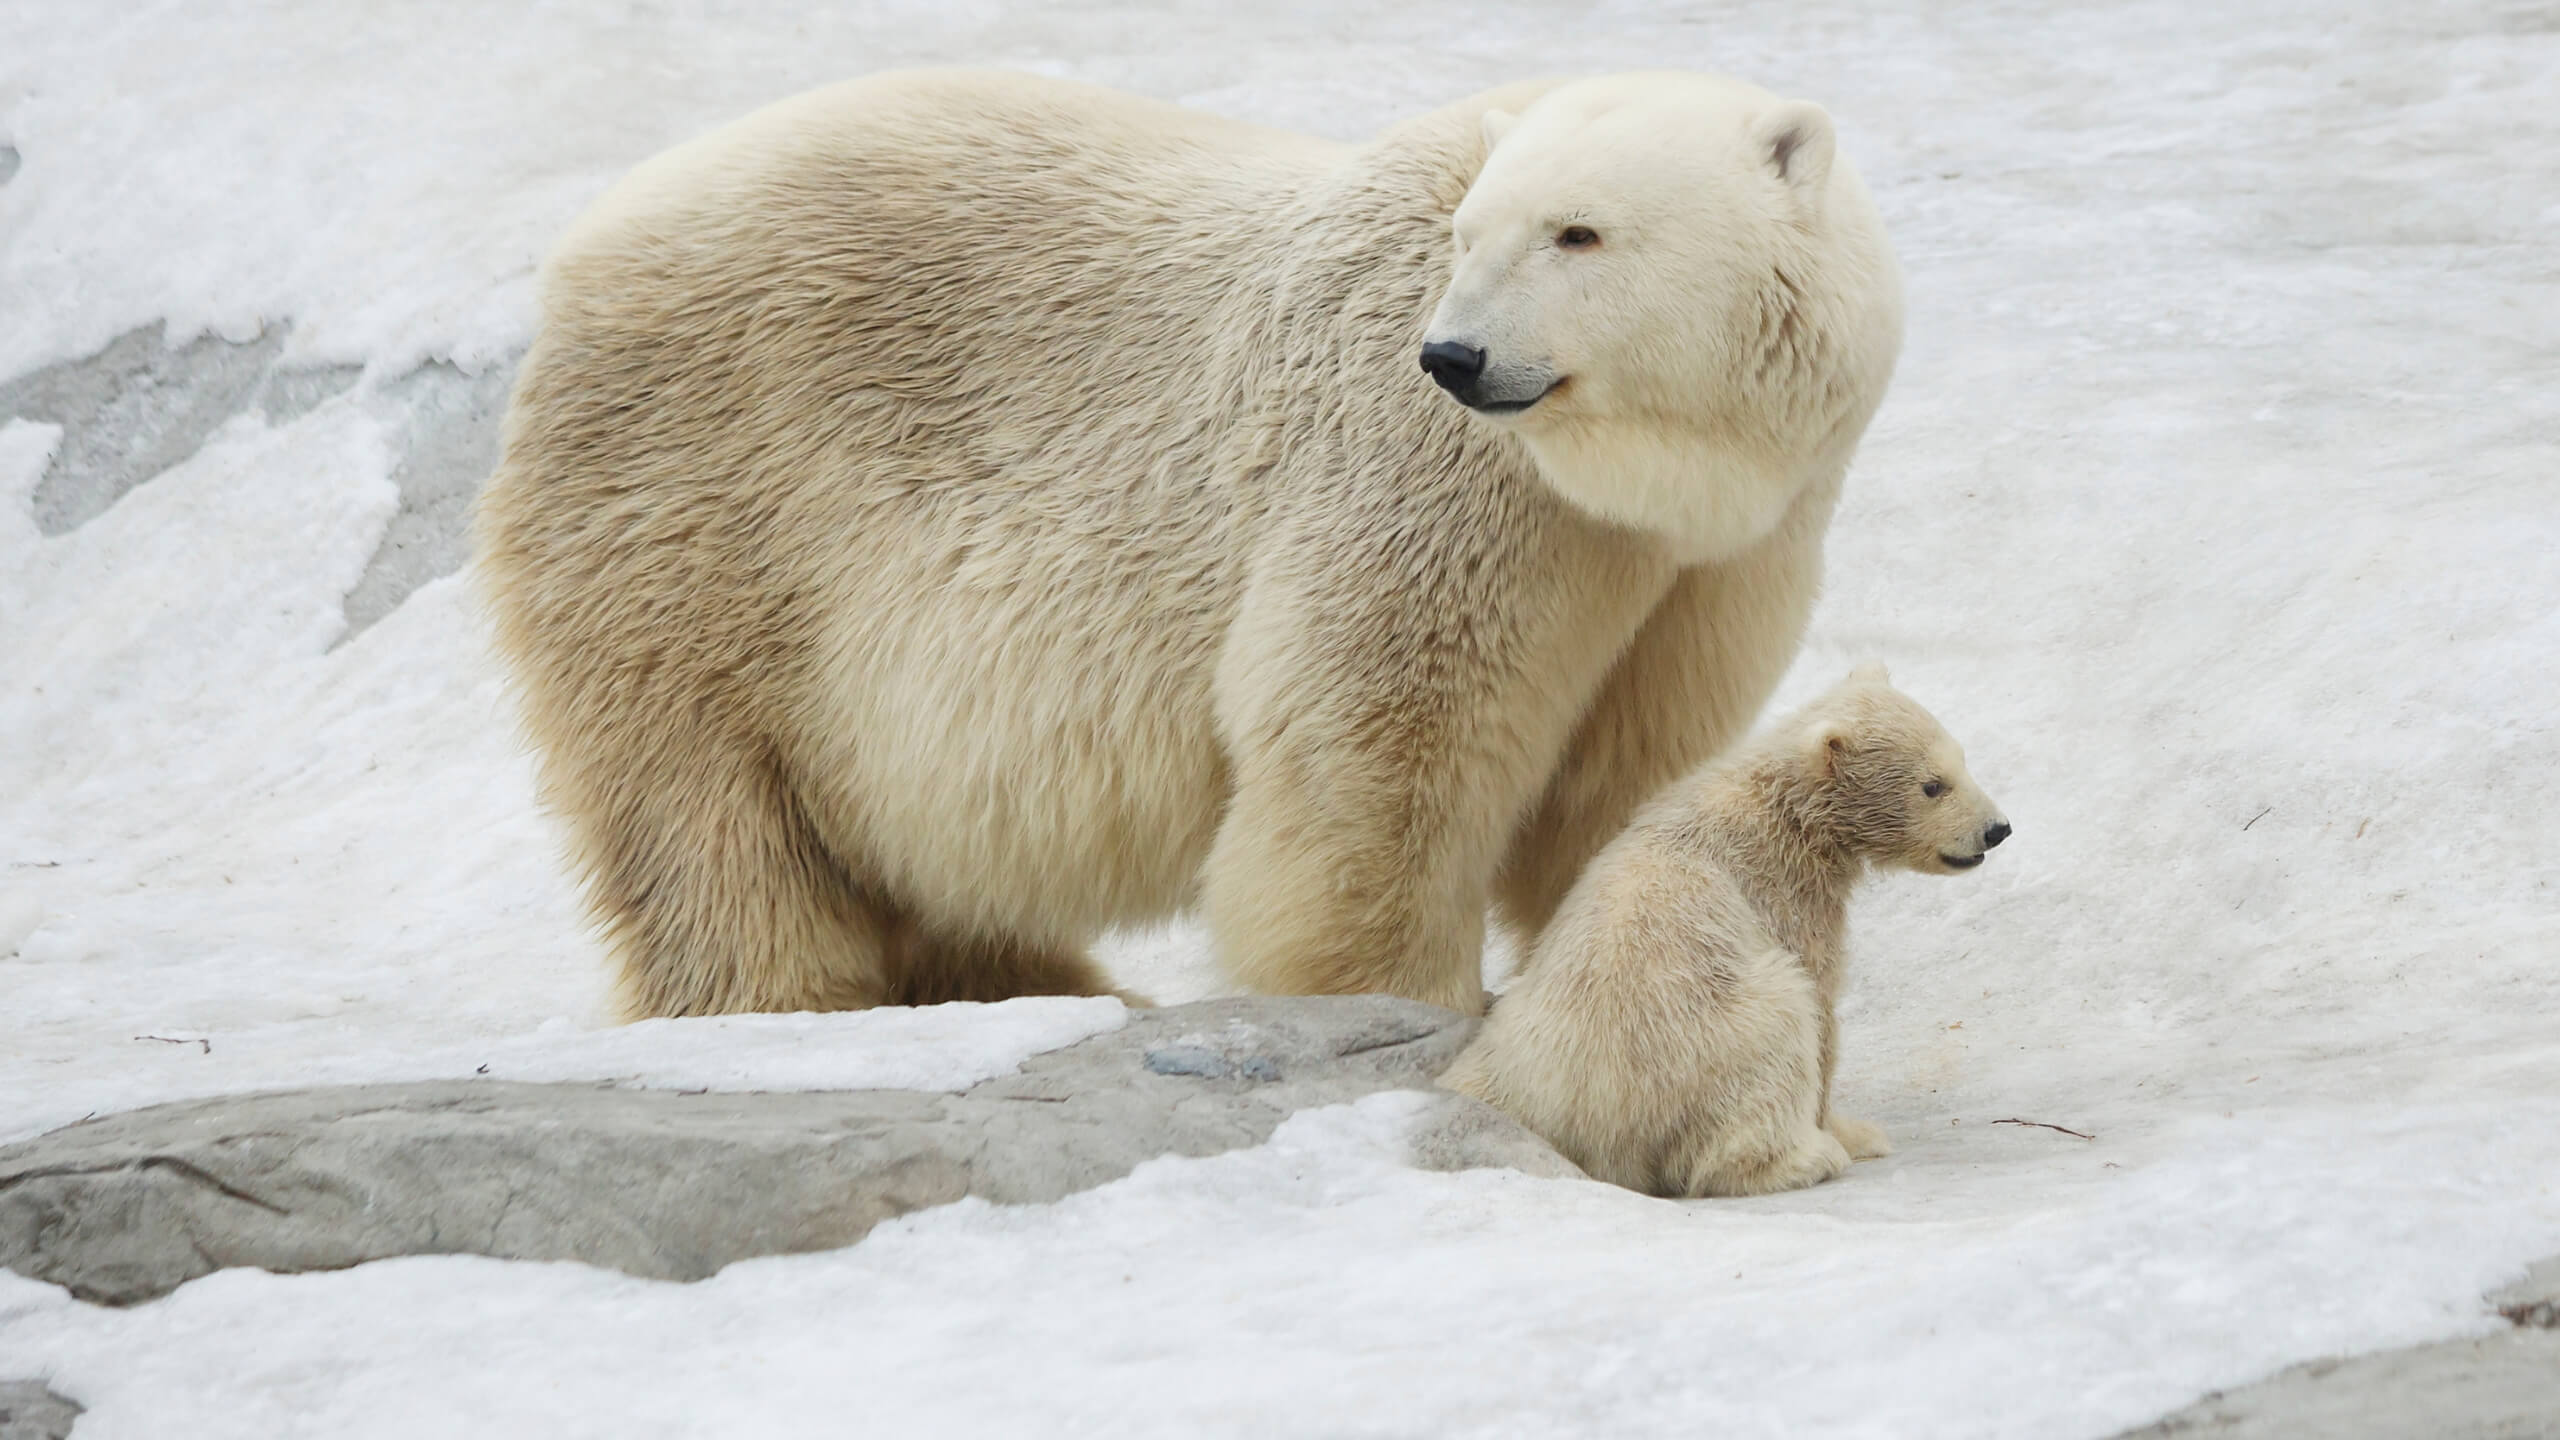 Polar bear compared to its cubs